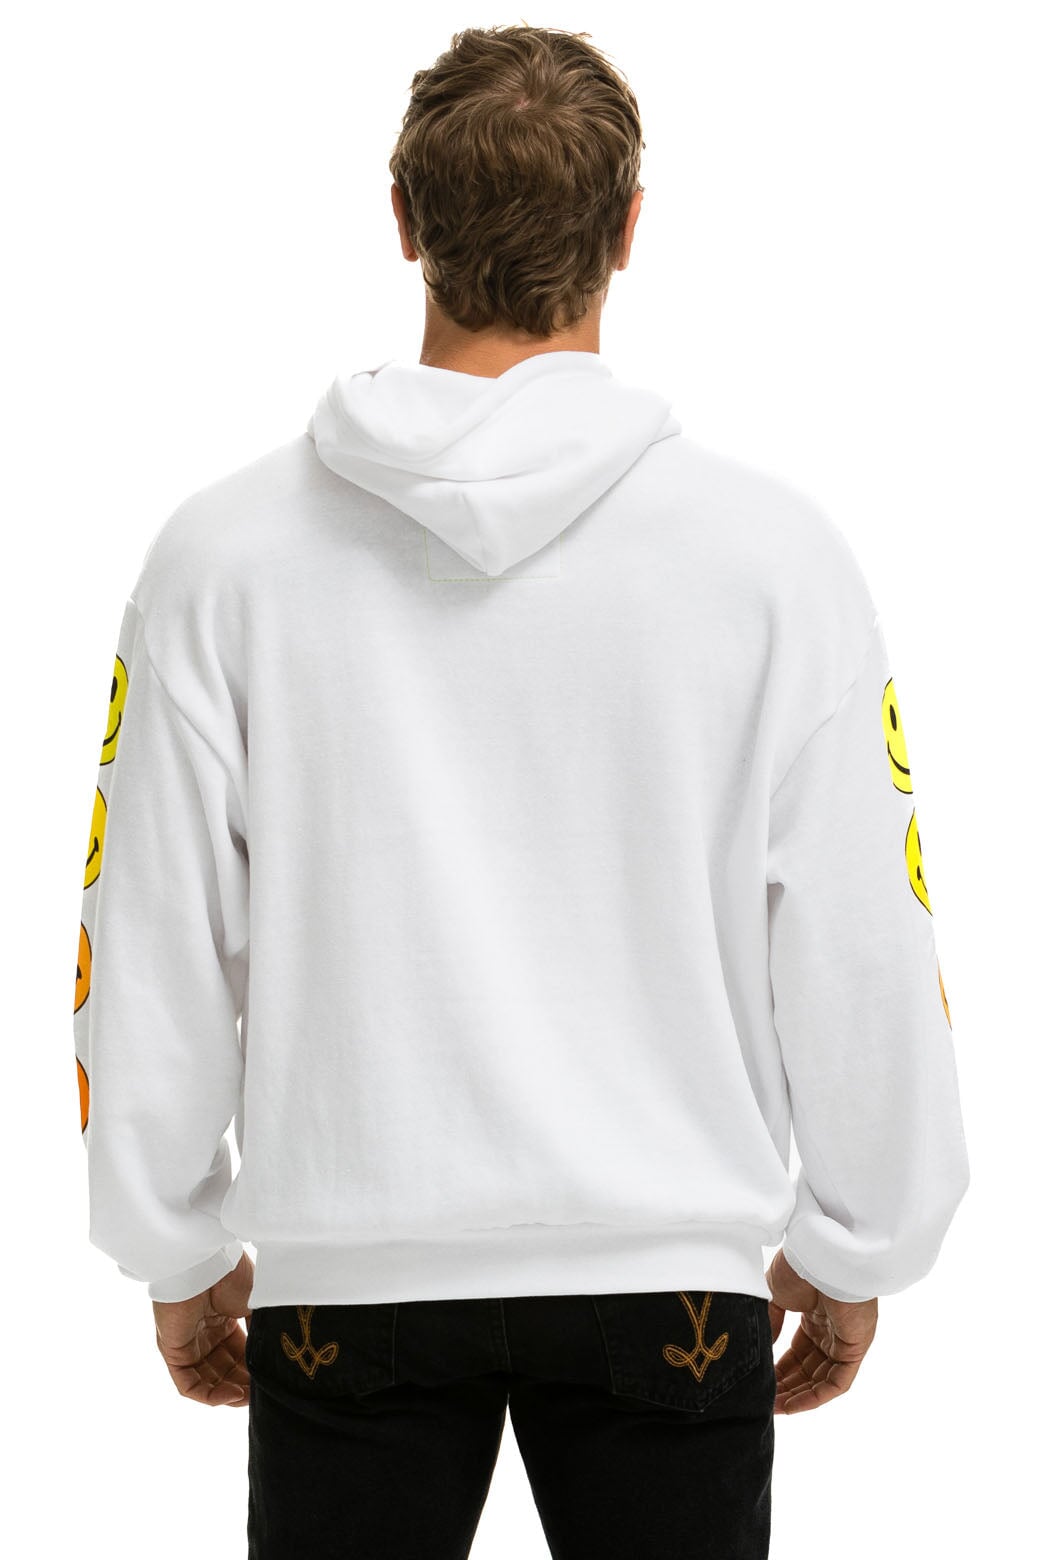 SMILEY SUNSET RELAXED PULLOVER HOODIE - WHITE Hoodie Aviator Nation 